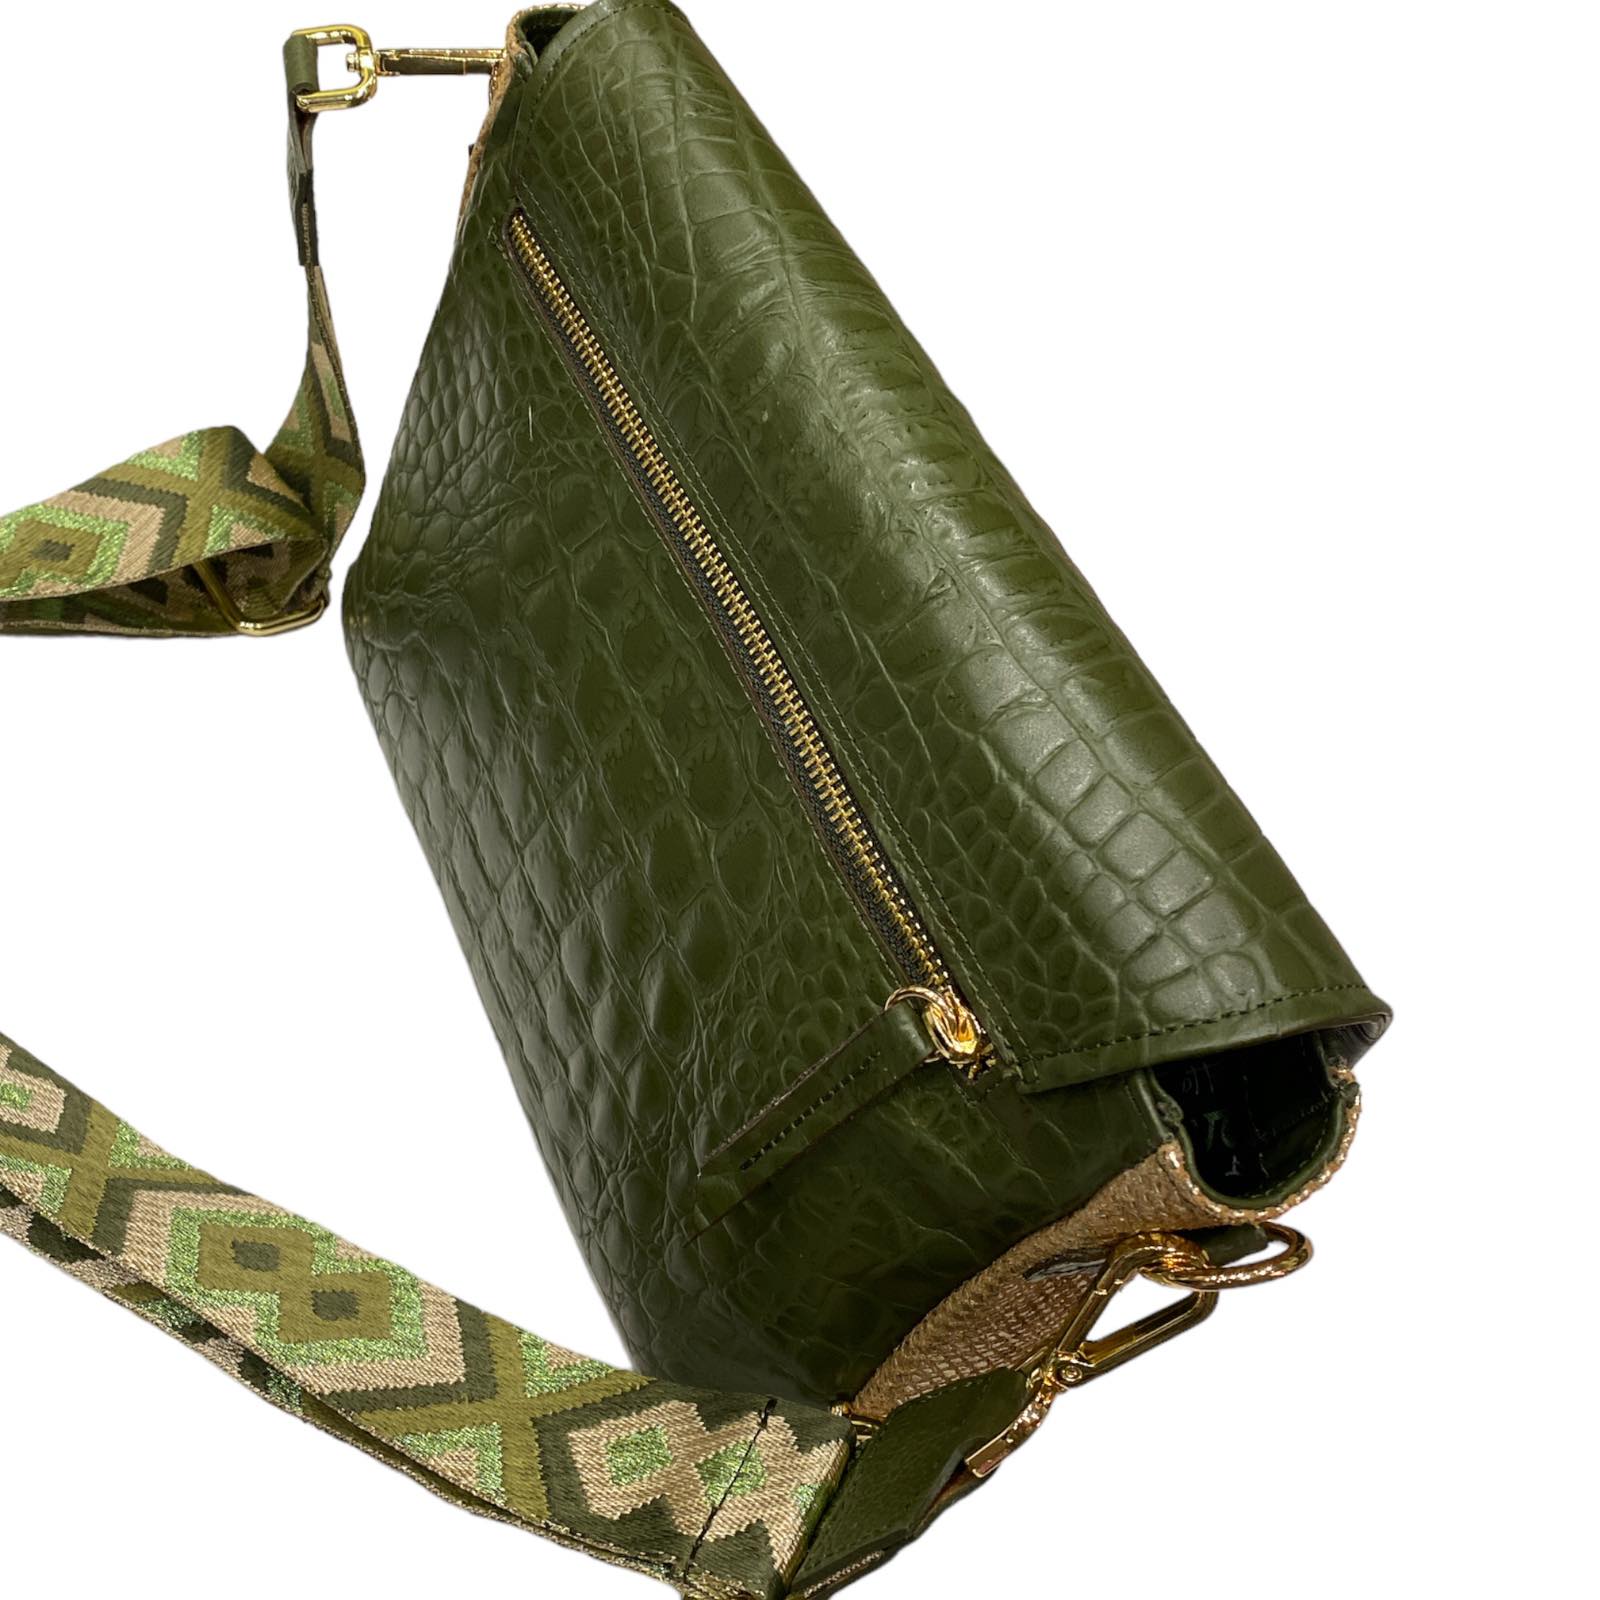 MANDY OLIVE GREEN LIMITED EDITION LEATHER BAG